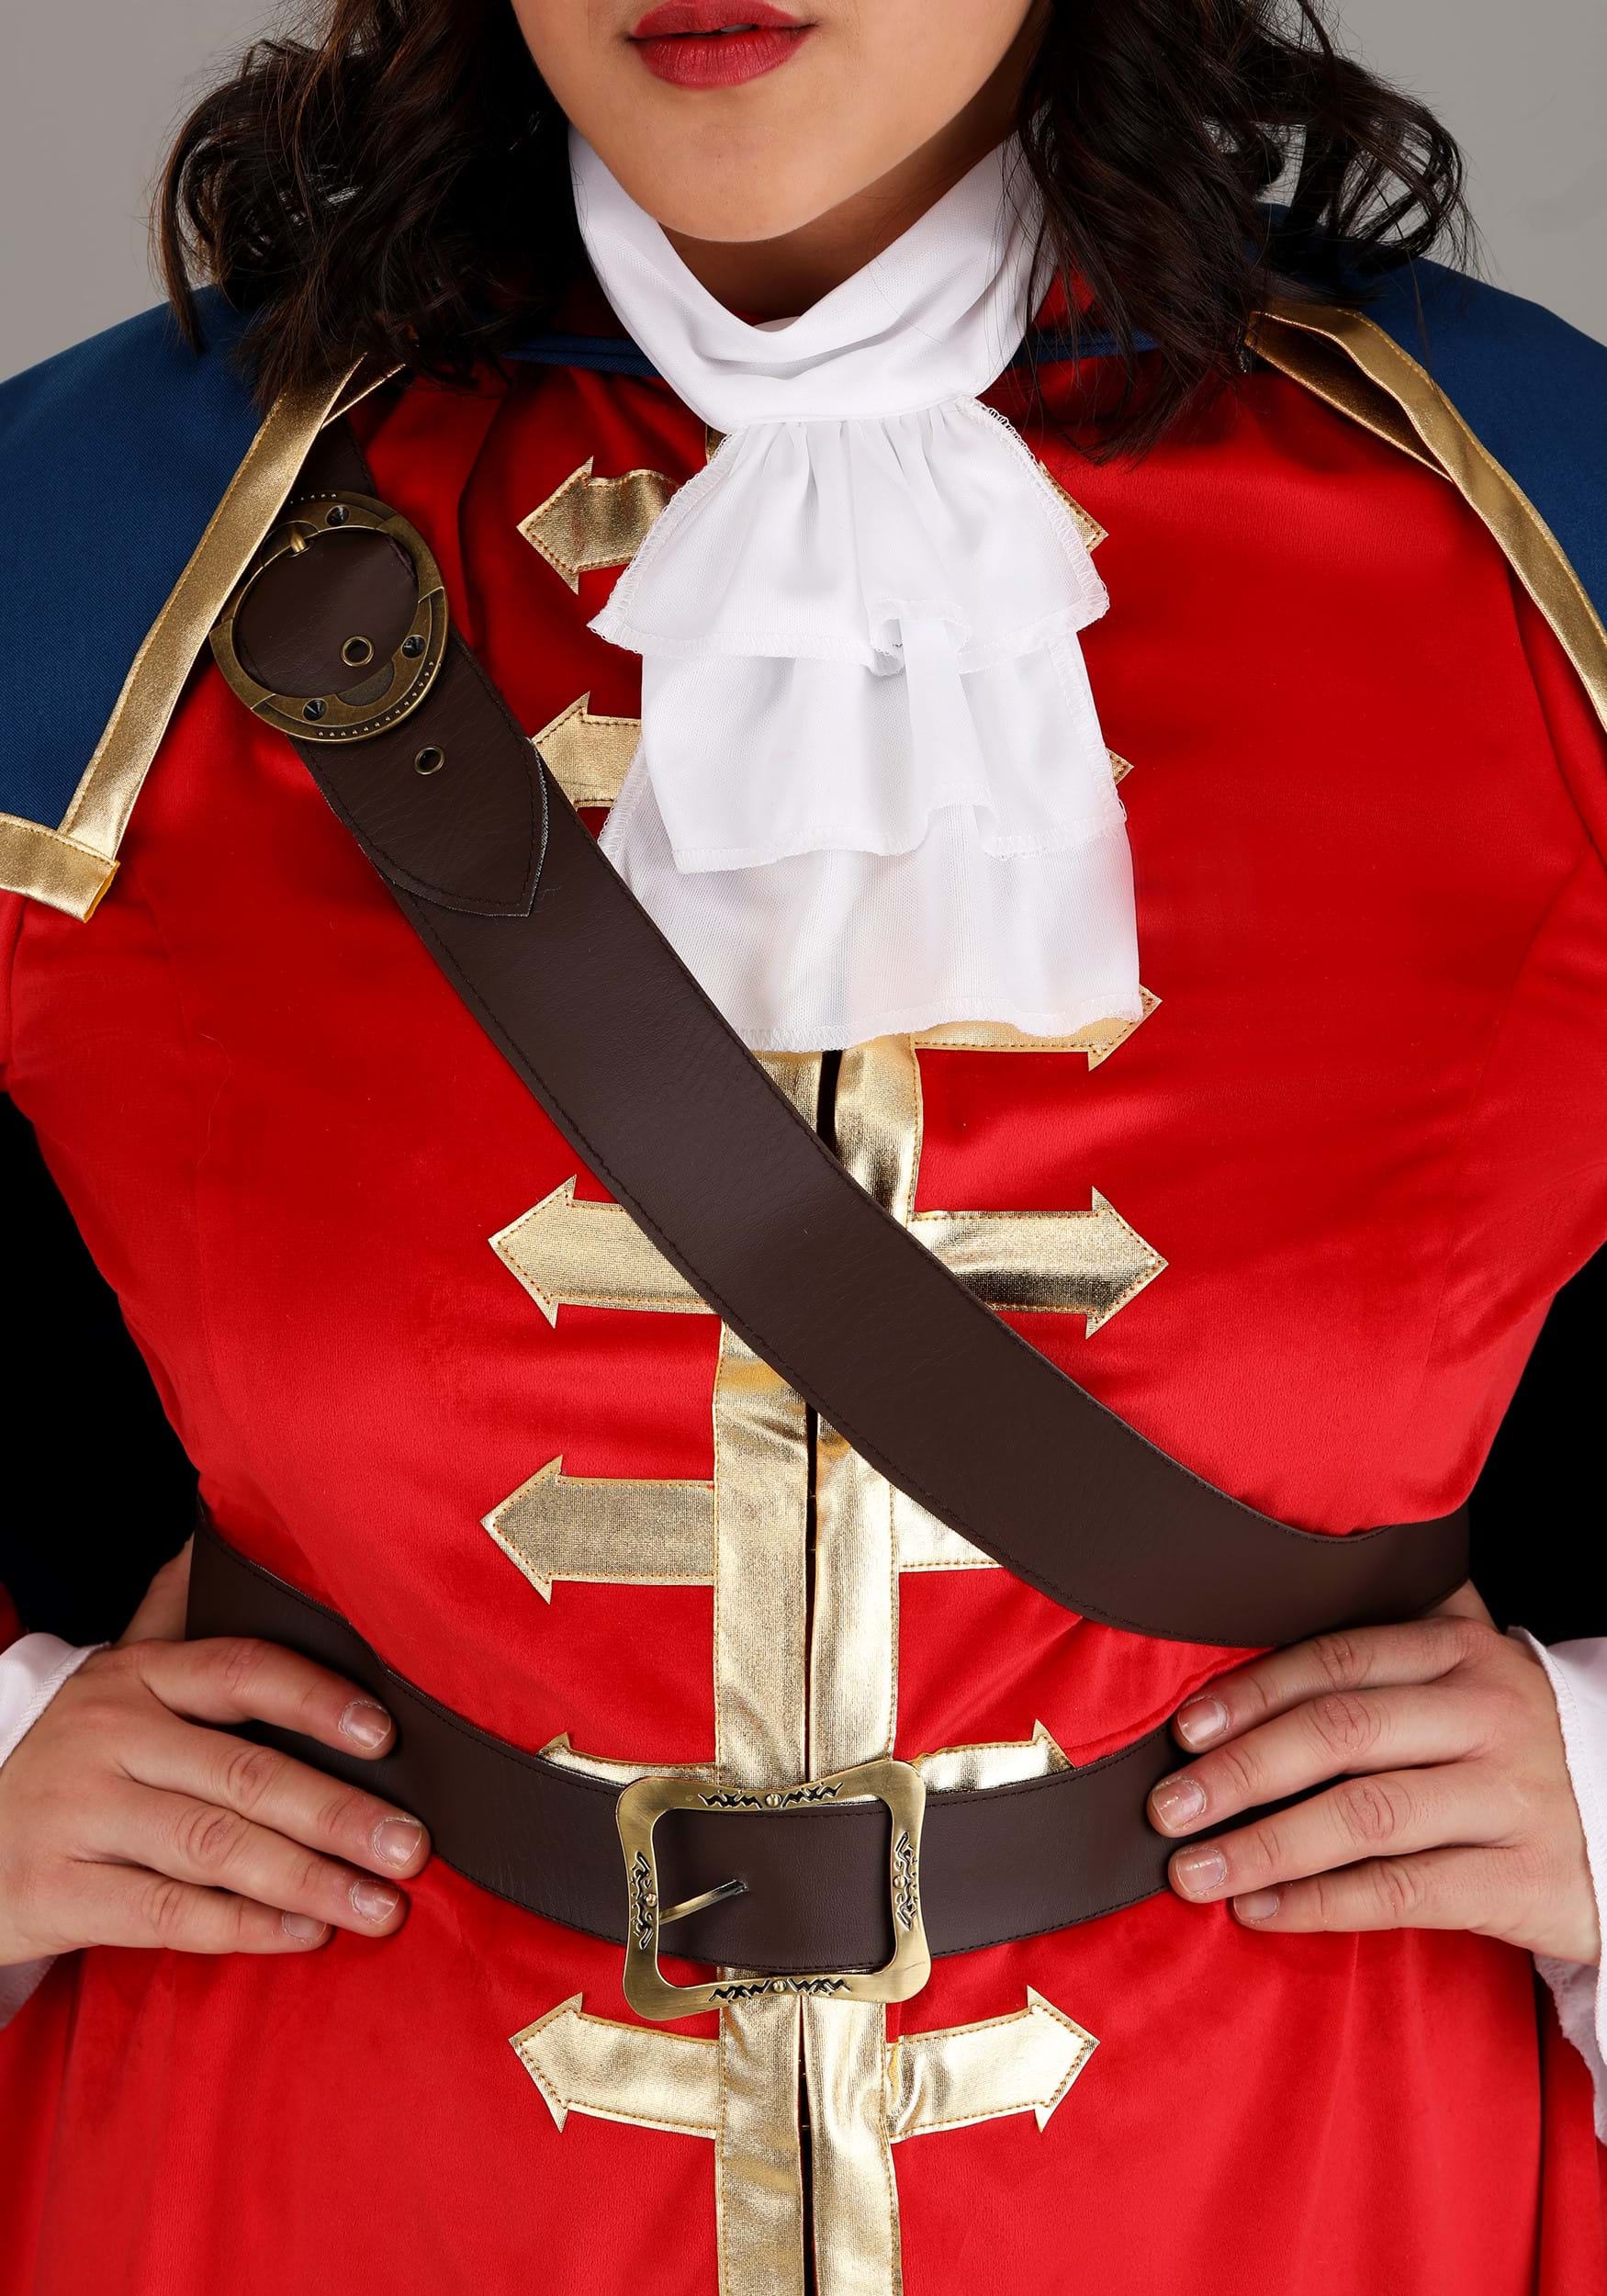 Red Sash for Prince or Pirate. Commander Shoulder Sash. Pirate Belt. Red Pirate Belt. Red Sash for Pirate Costume.